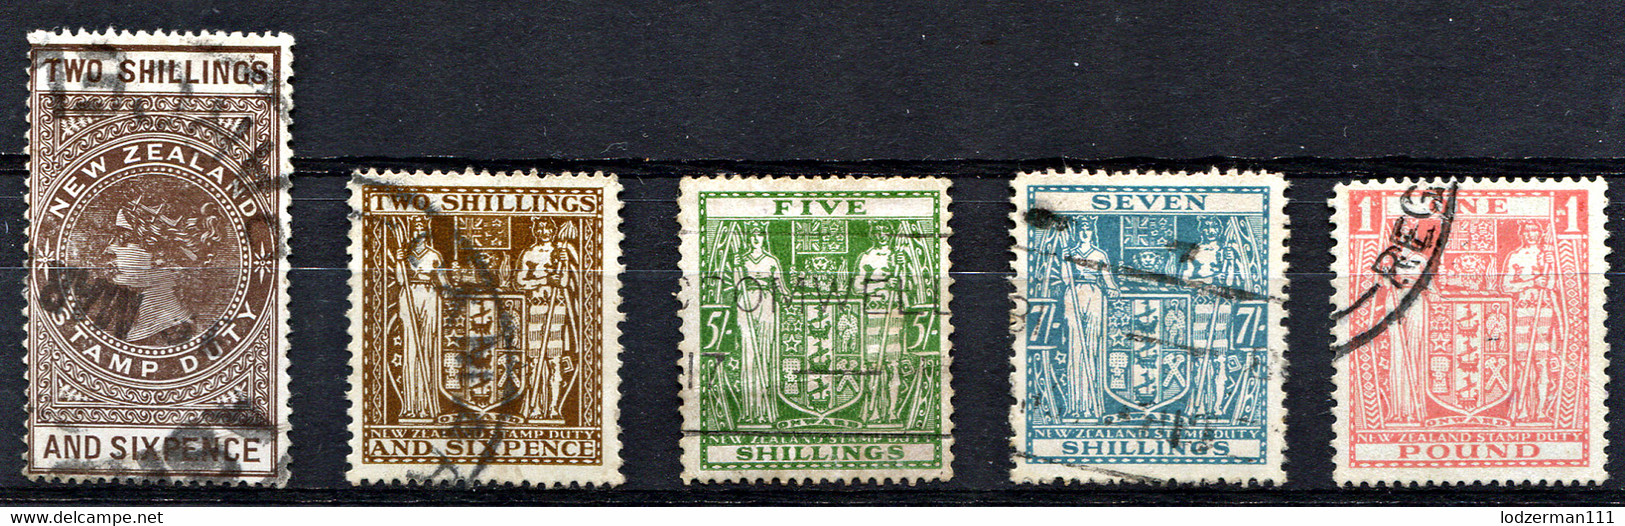 NZ 1931 Wmk NZ Close Star - Five Used Duty Stamps - Postal Fiscal Stamps